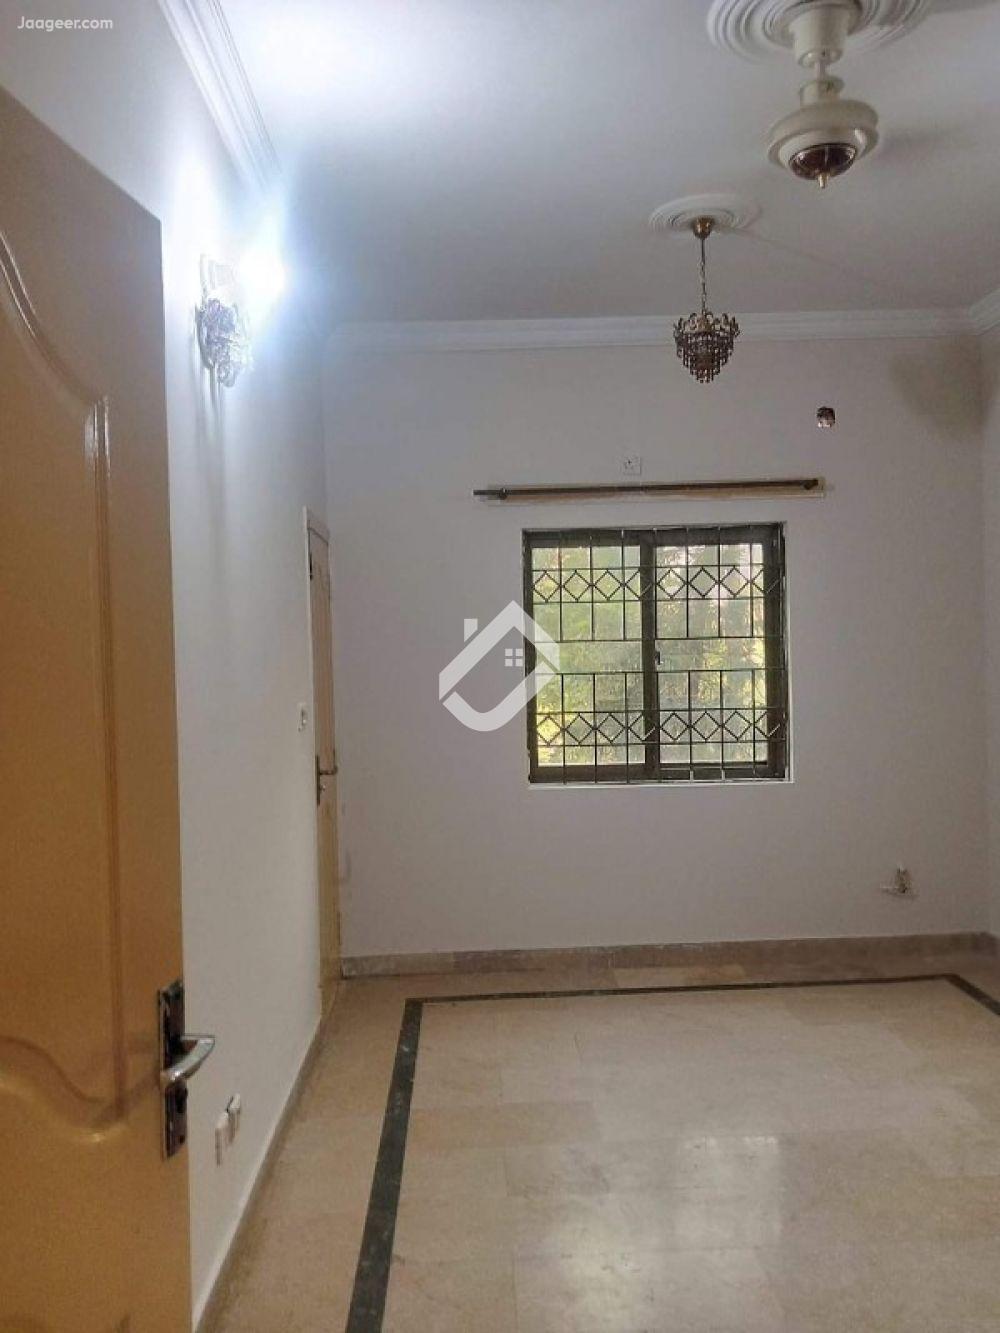 View  4 Marla Upper Portion House For Rent In G11 in G-11, Islamabad